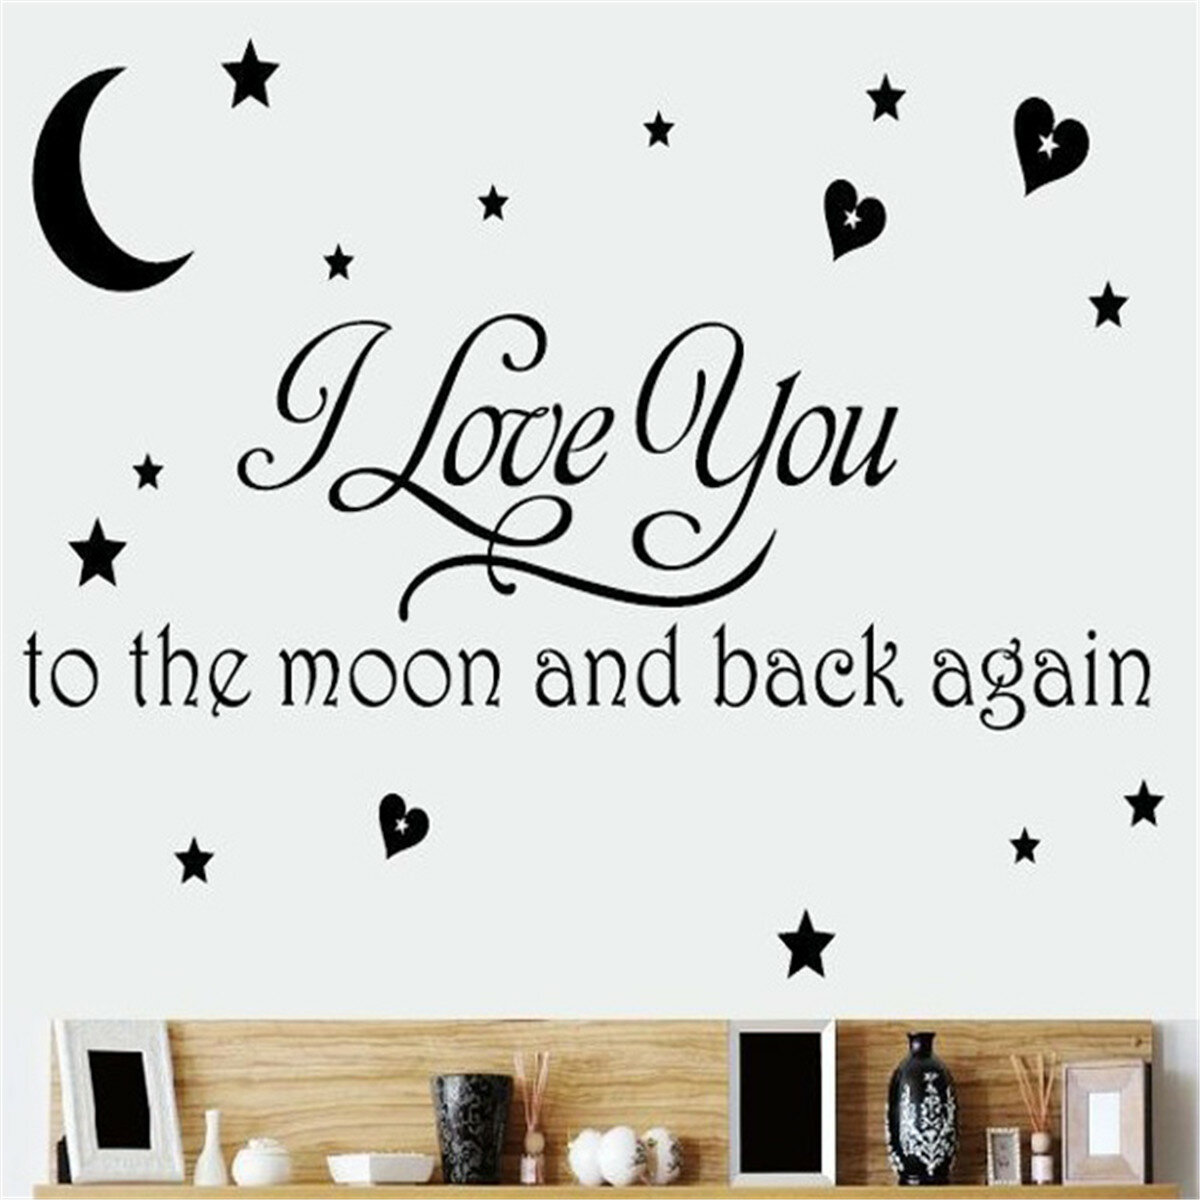 DIY Wall Sticker I love You to Moon PVC Removable Baby Room Wallpaper Wall Decal Stickers